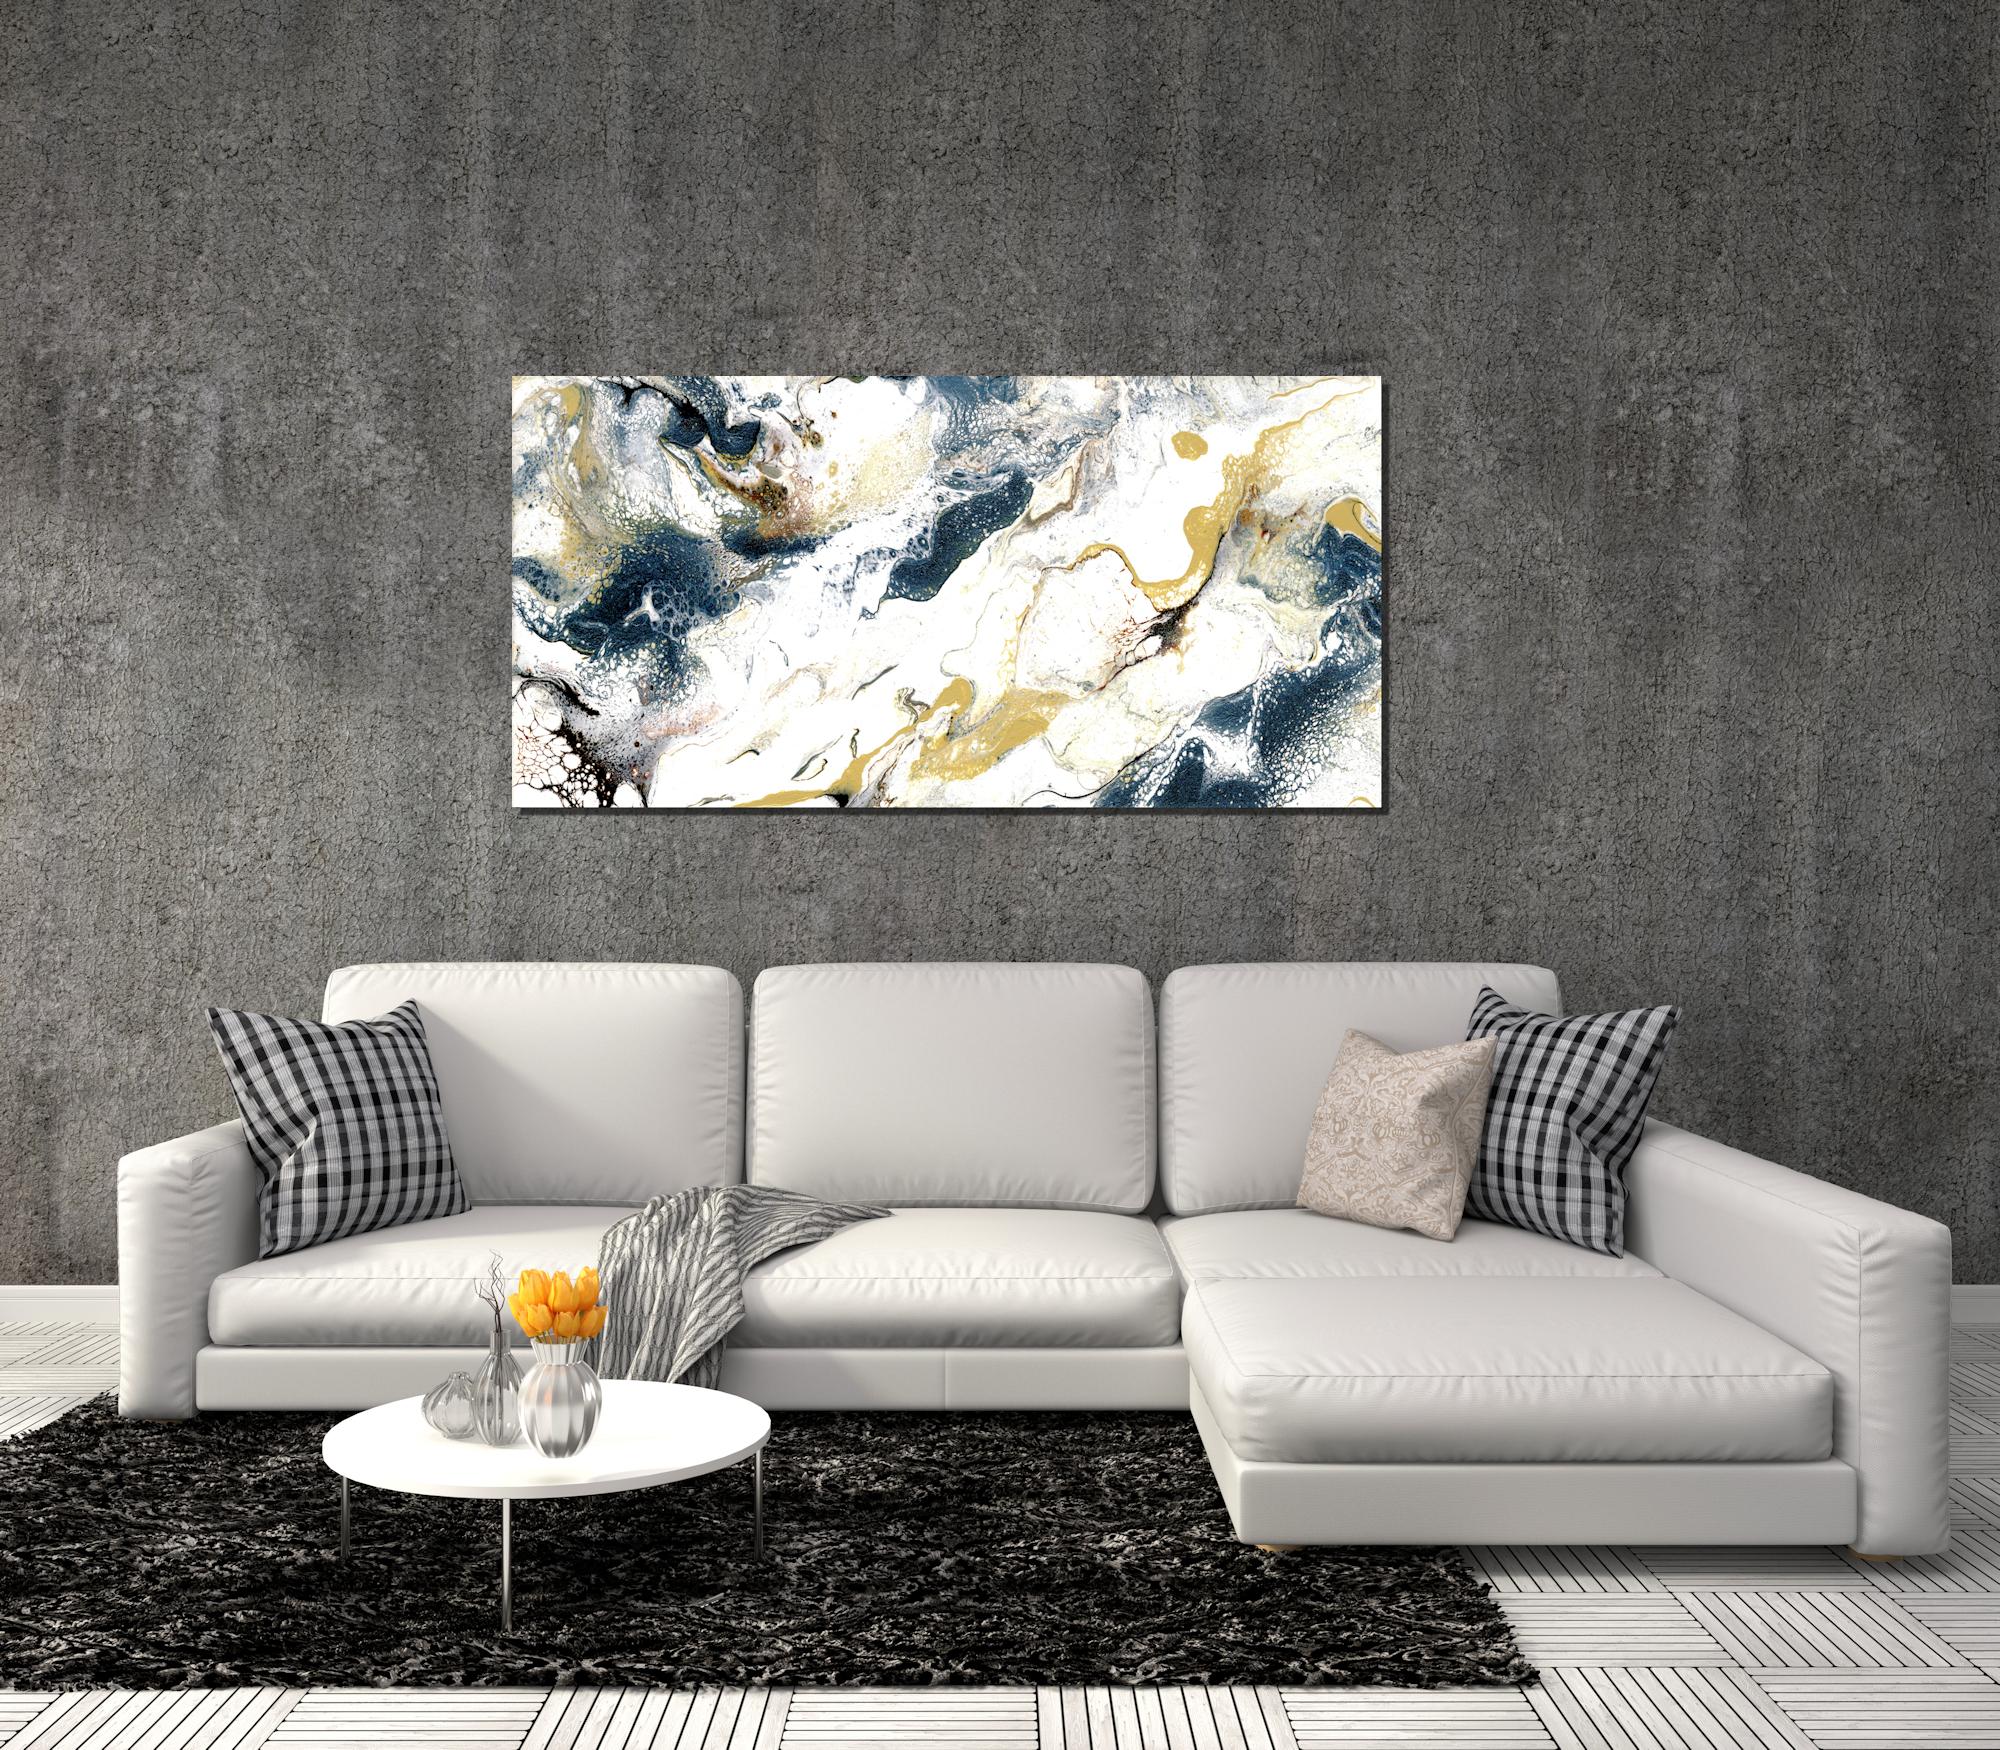 Industrial Modern Contemporary Giclee Print on Metal Abstract Painting by Cessy  For Sale 3